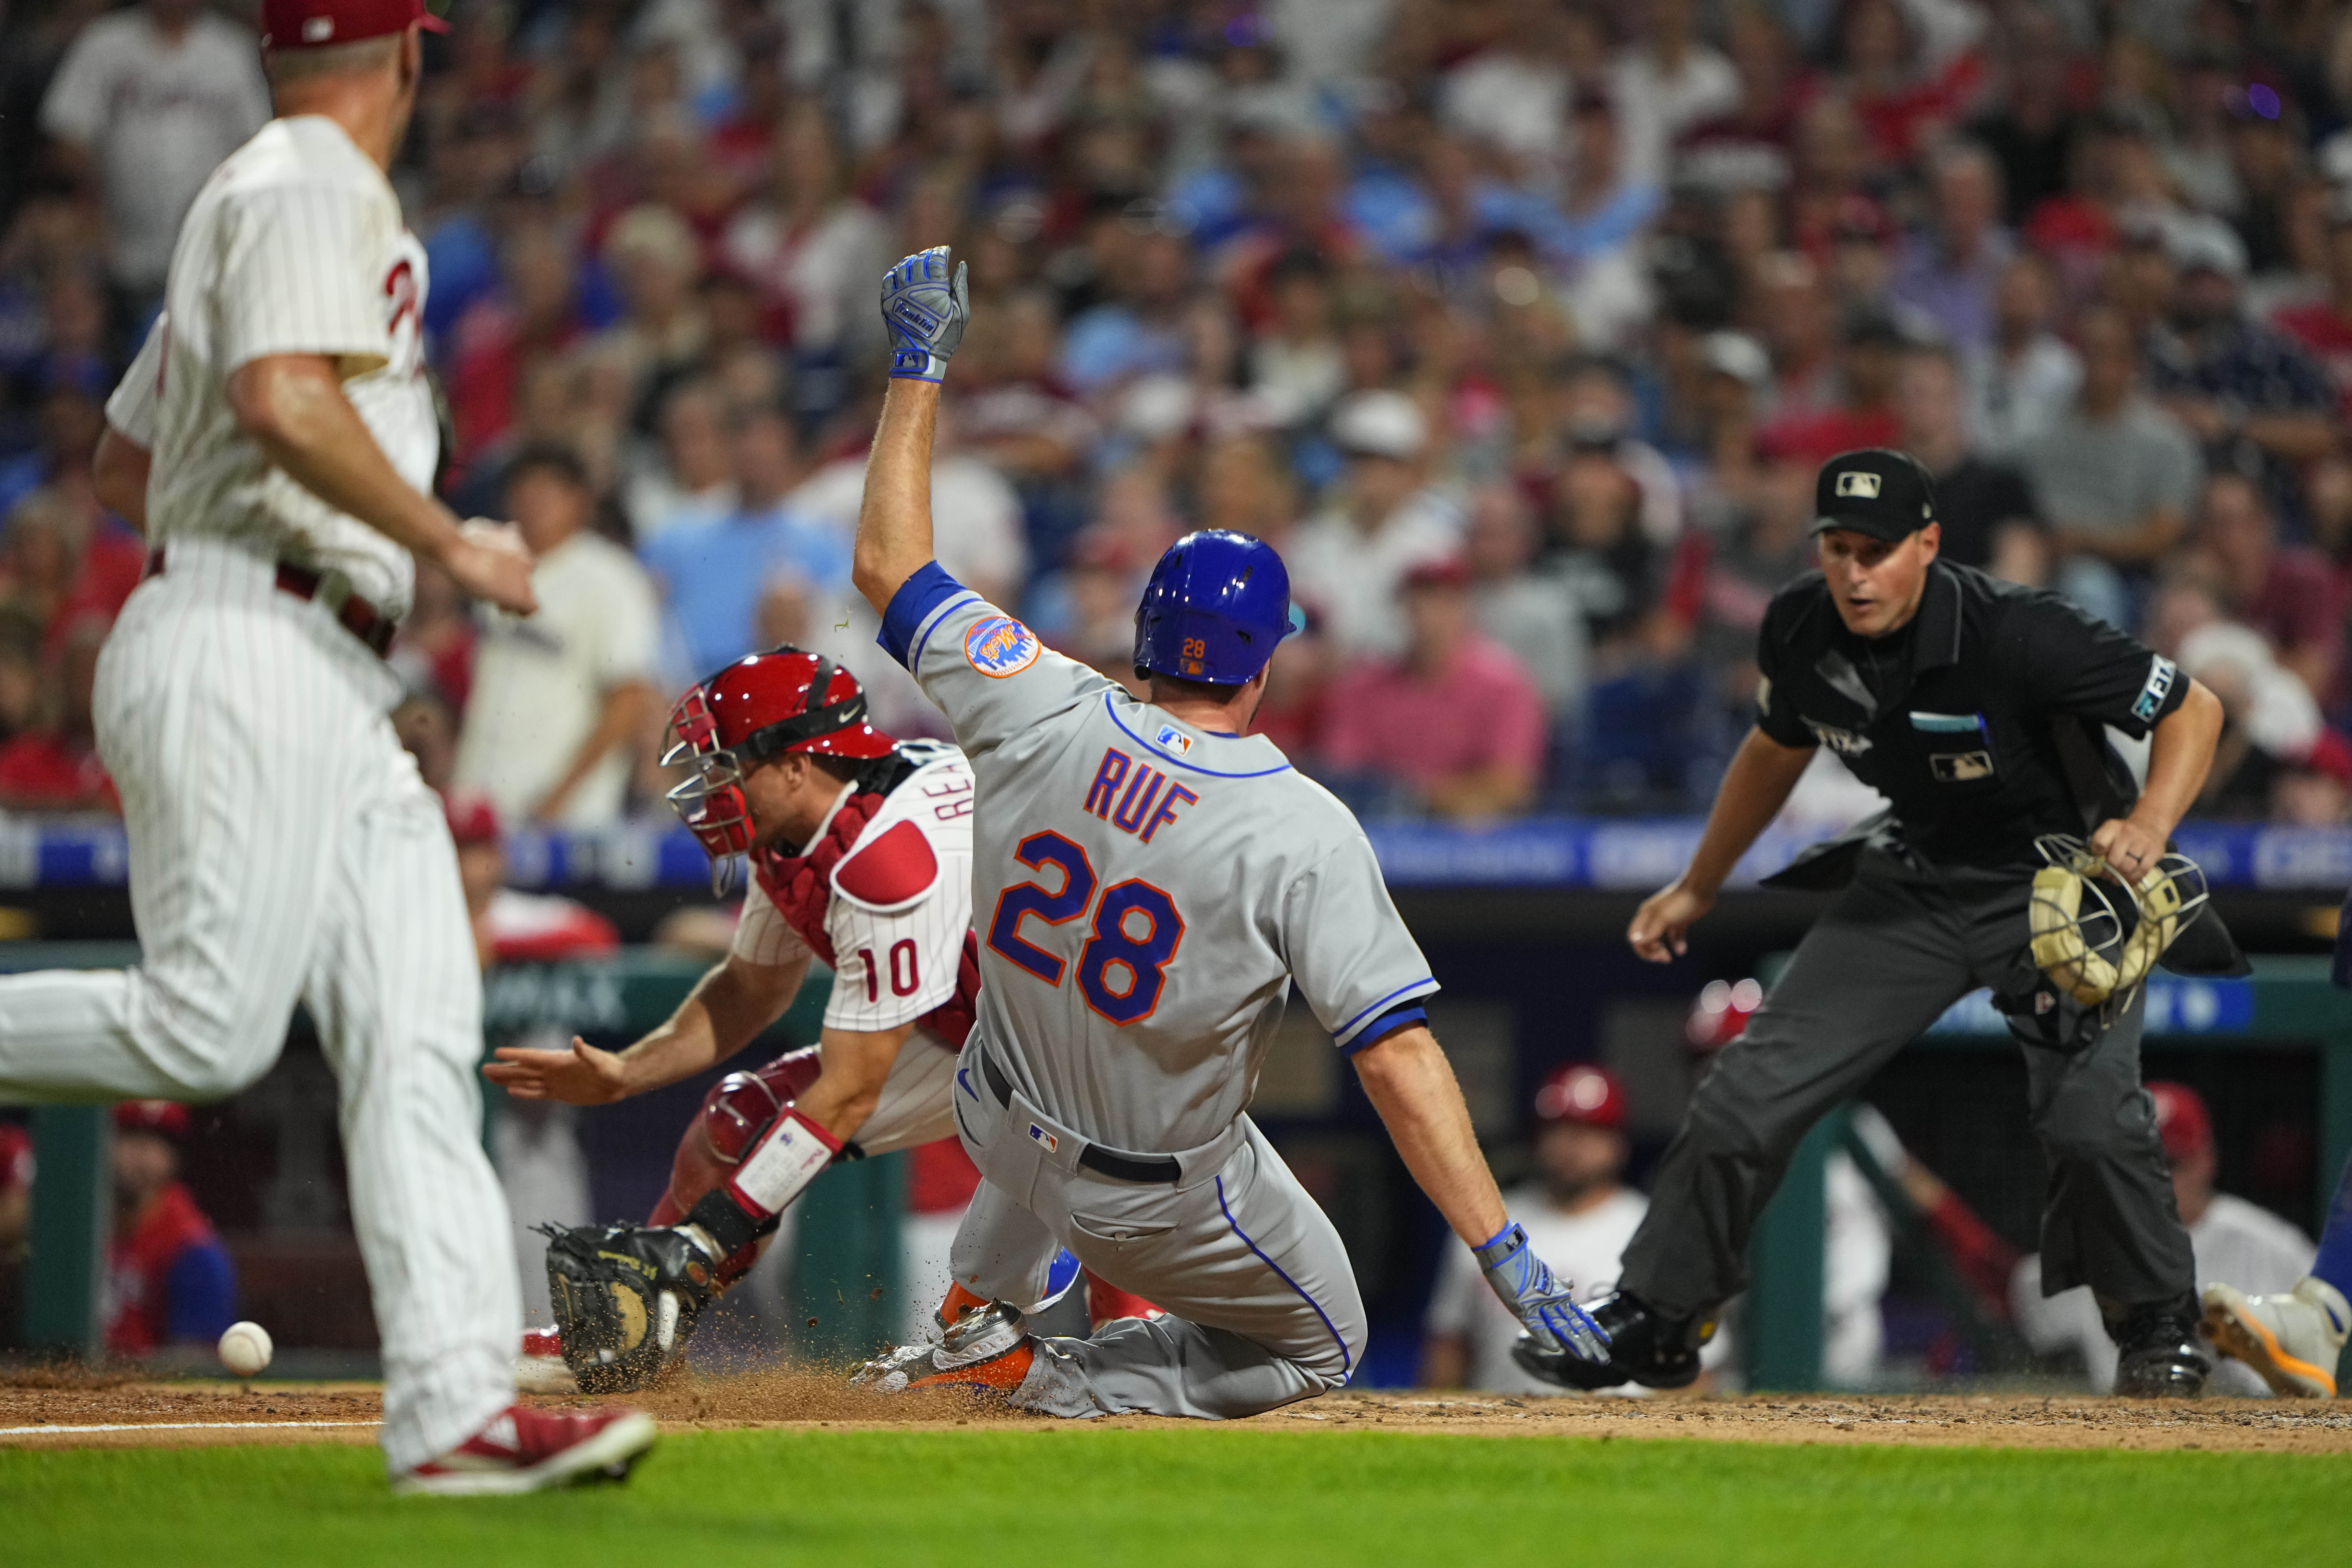 New York Mets vs. Philadelphia Phillies, live stream, TV channel, time, how to watch MLB